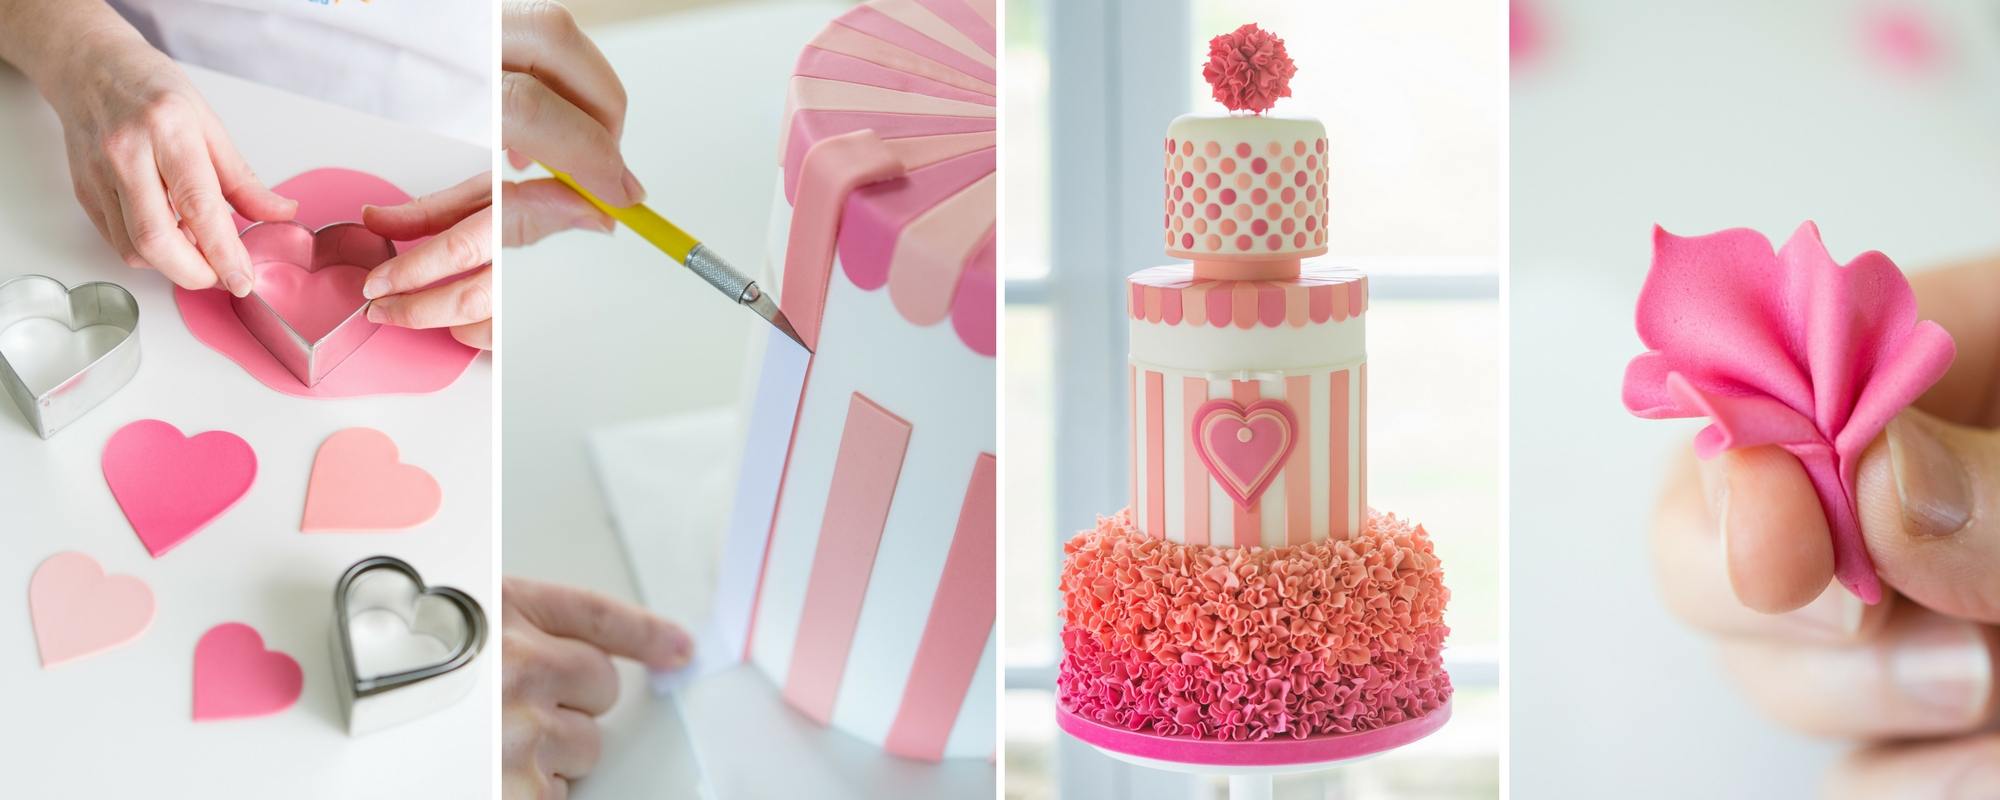 steps for making Lindy Smith's sweetheart stripes party cakes